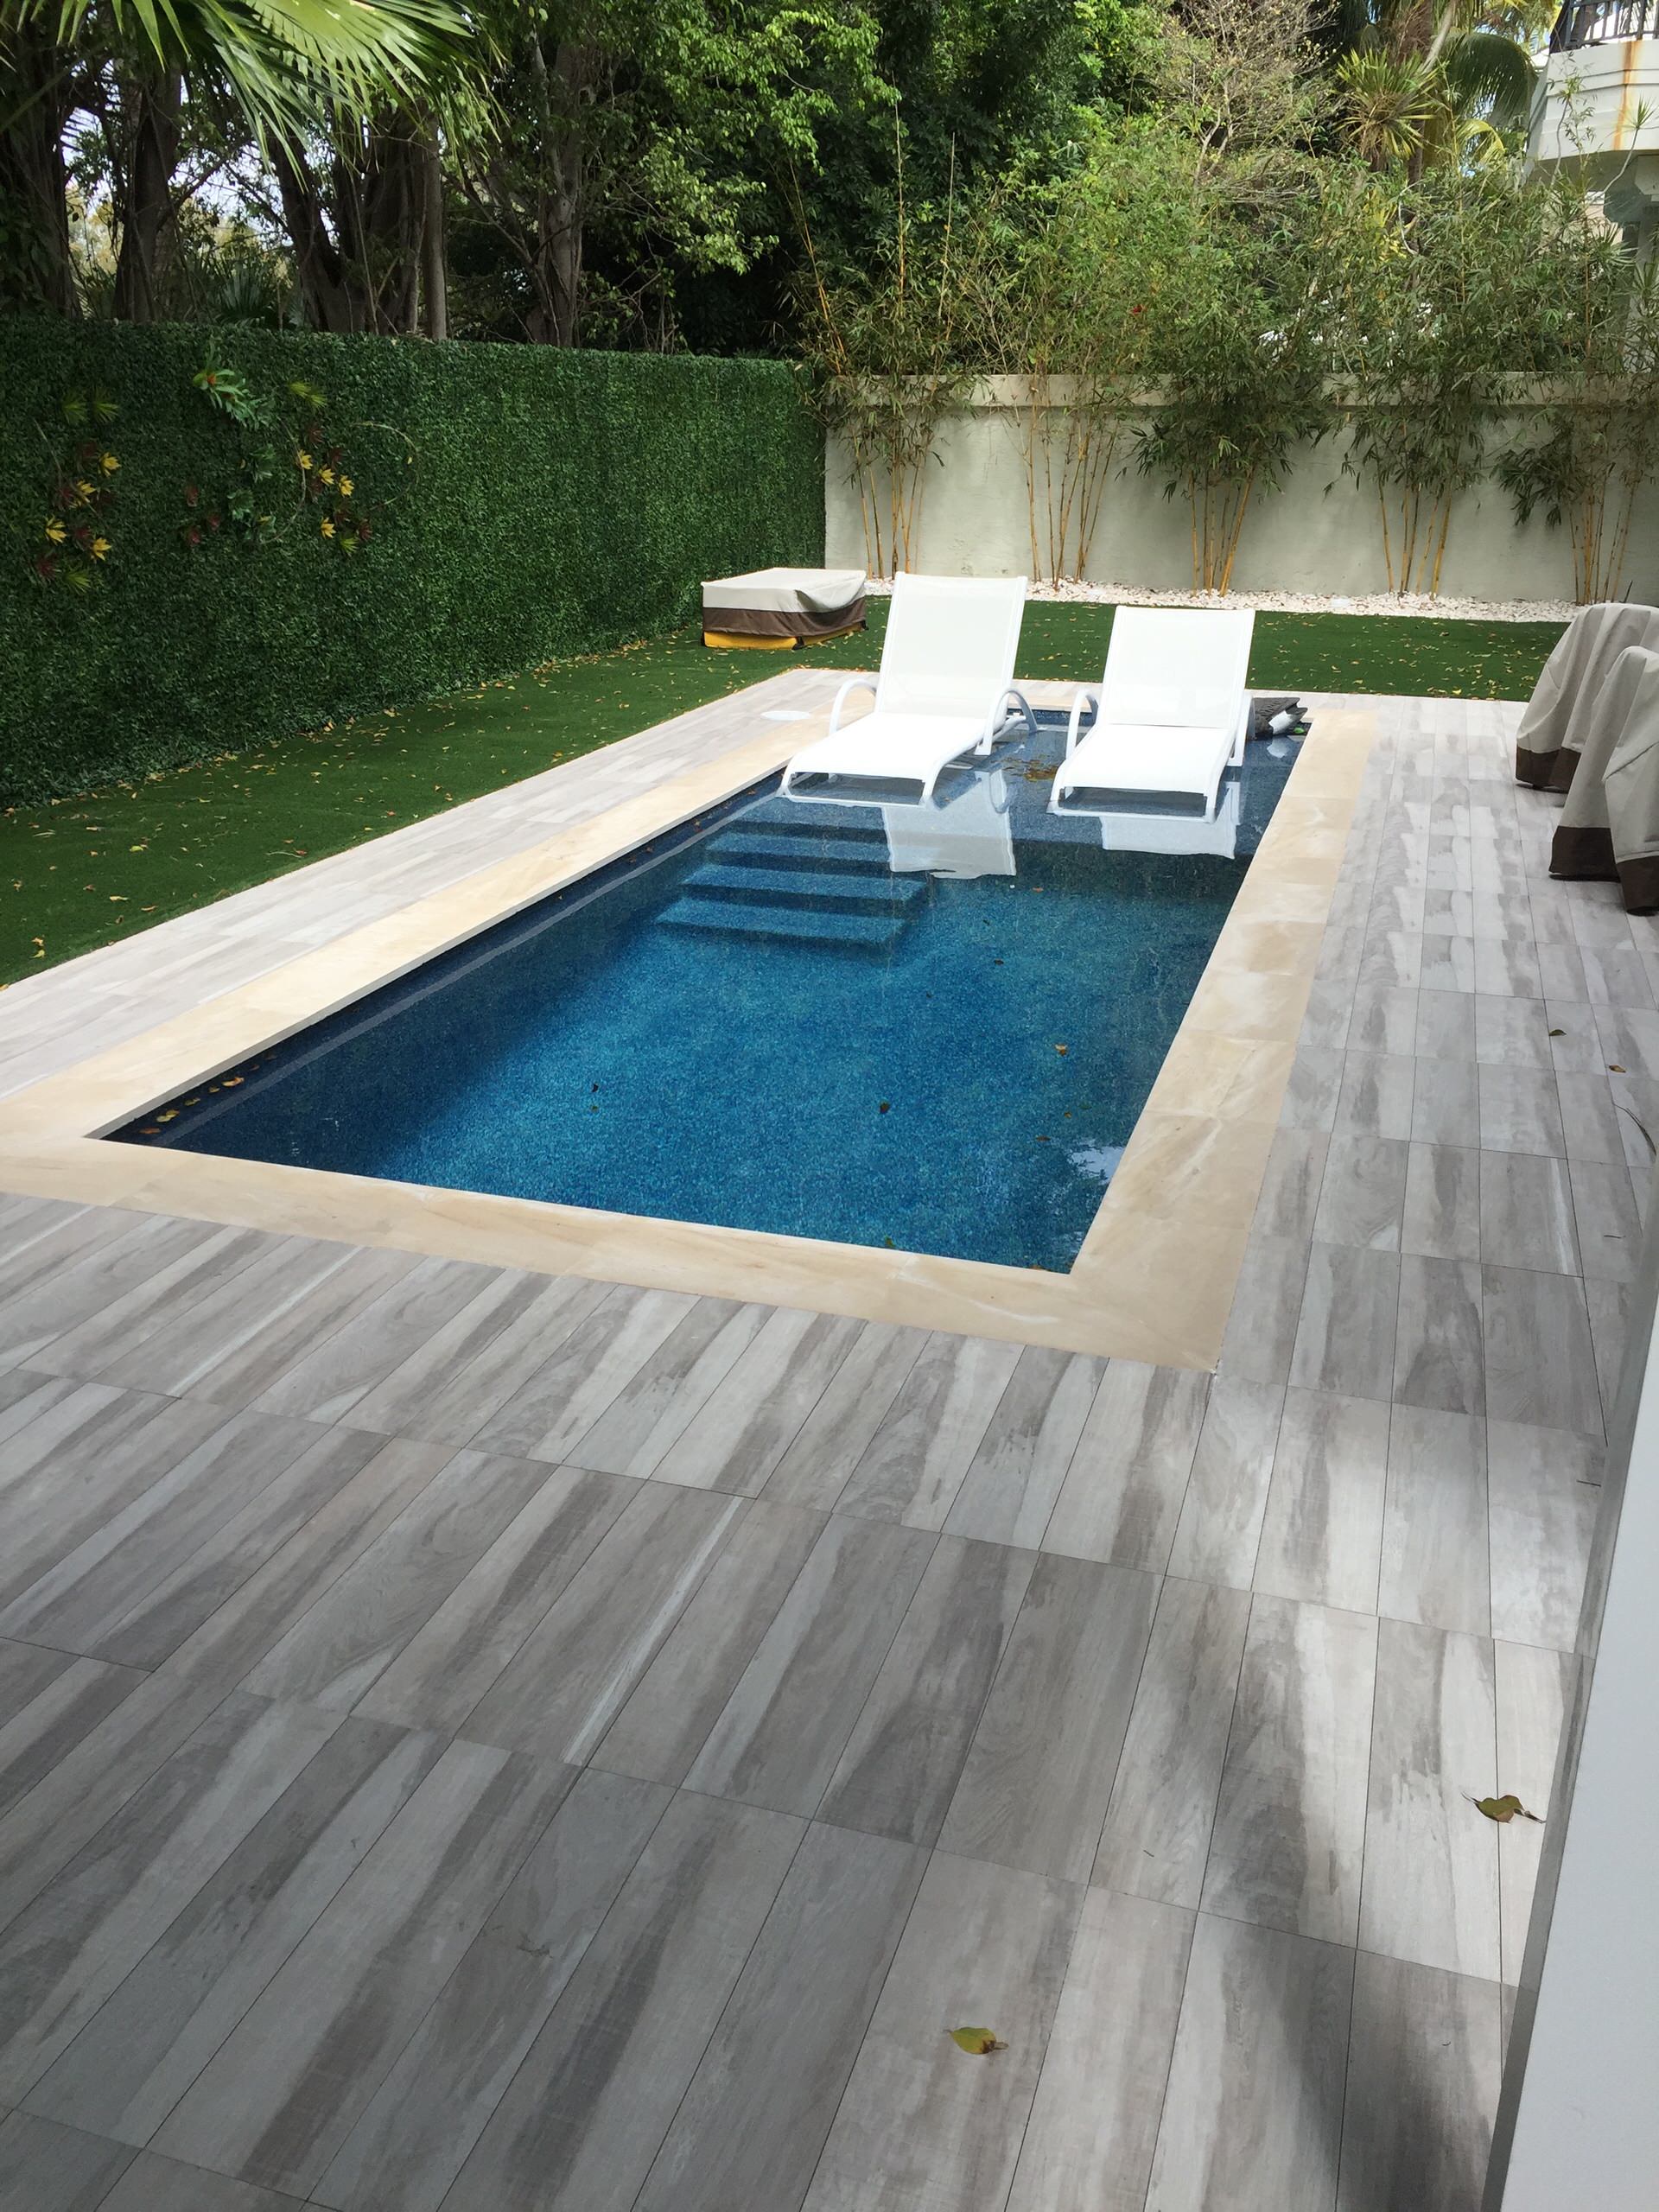 75 Beautiful Small Backyard Pool Pictures Ideas October 2020 Houzz